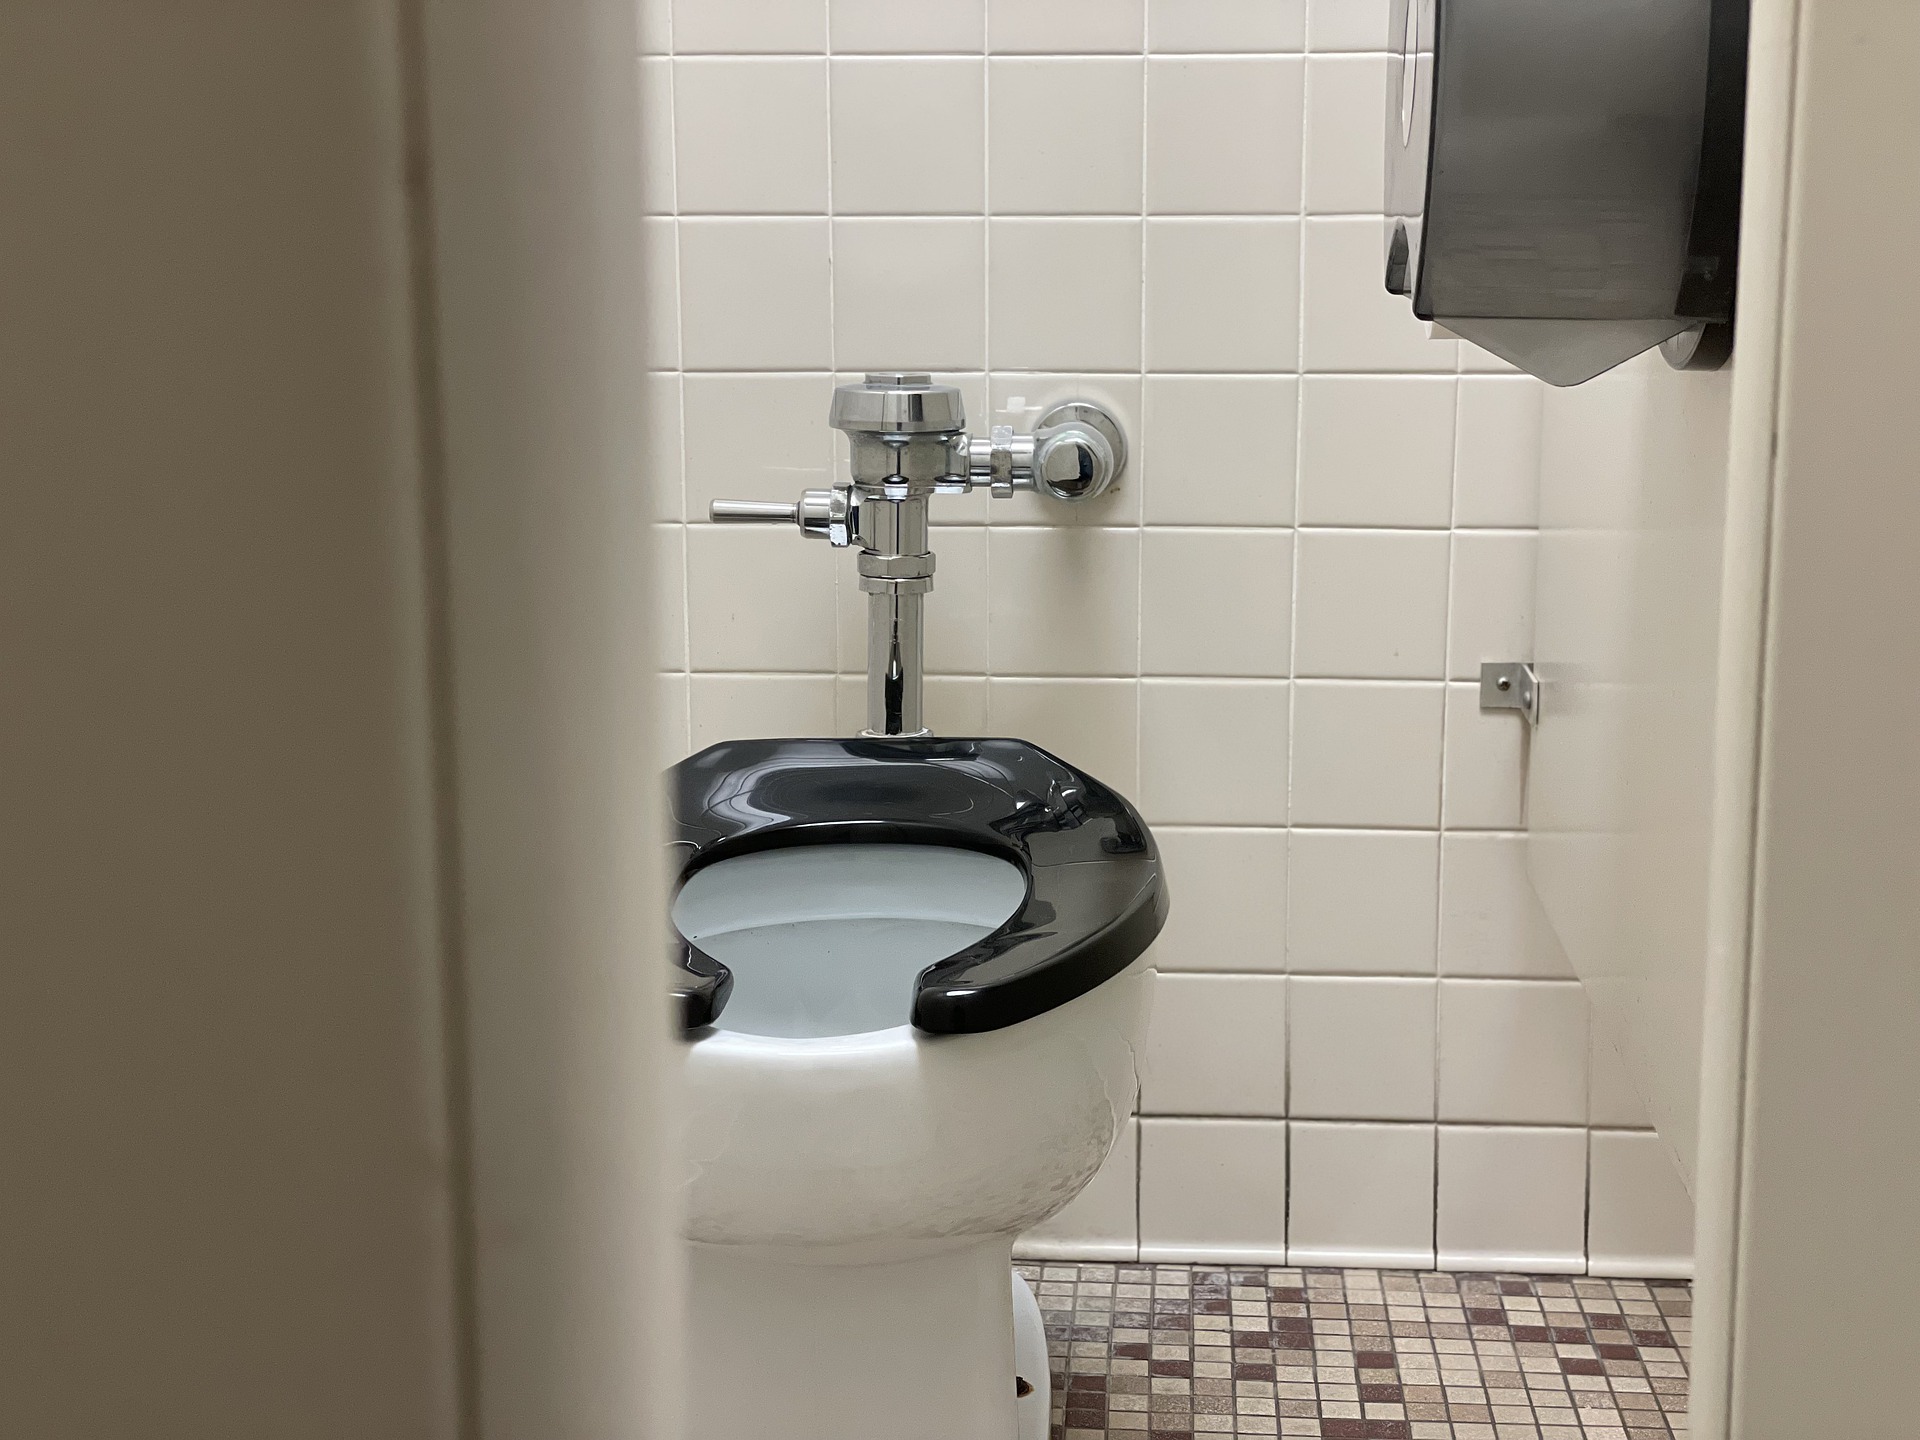 A picture of an ADA Toilet with tile on the walls.